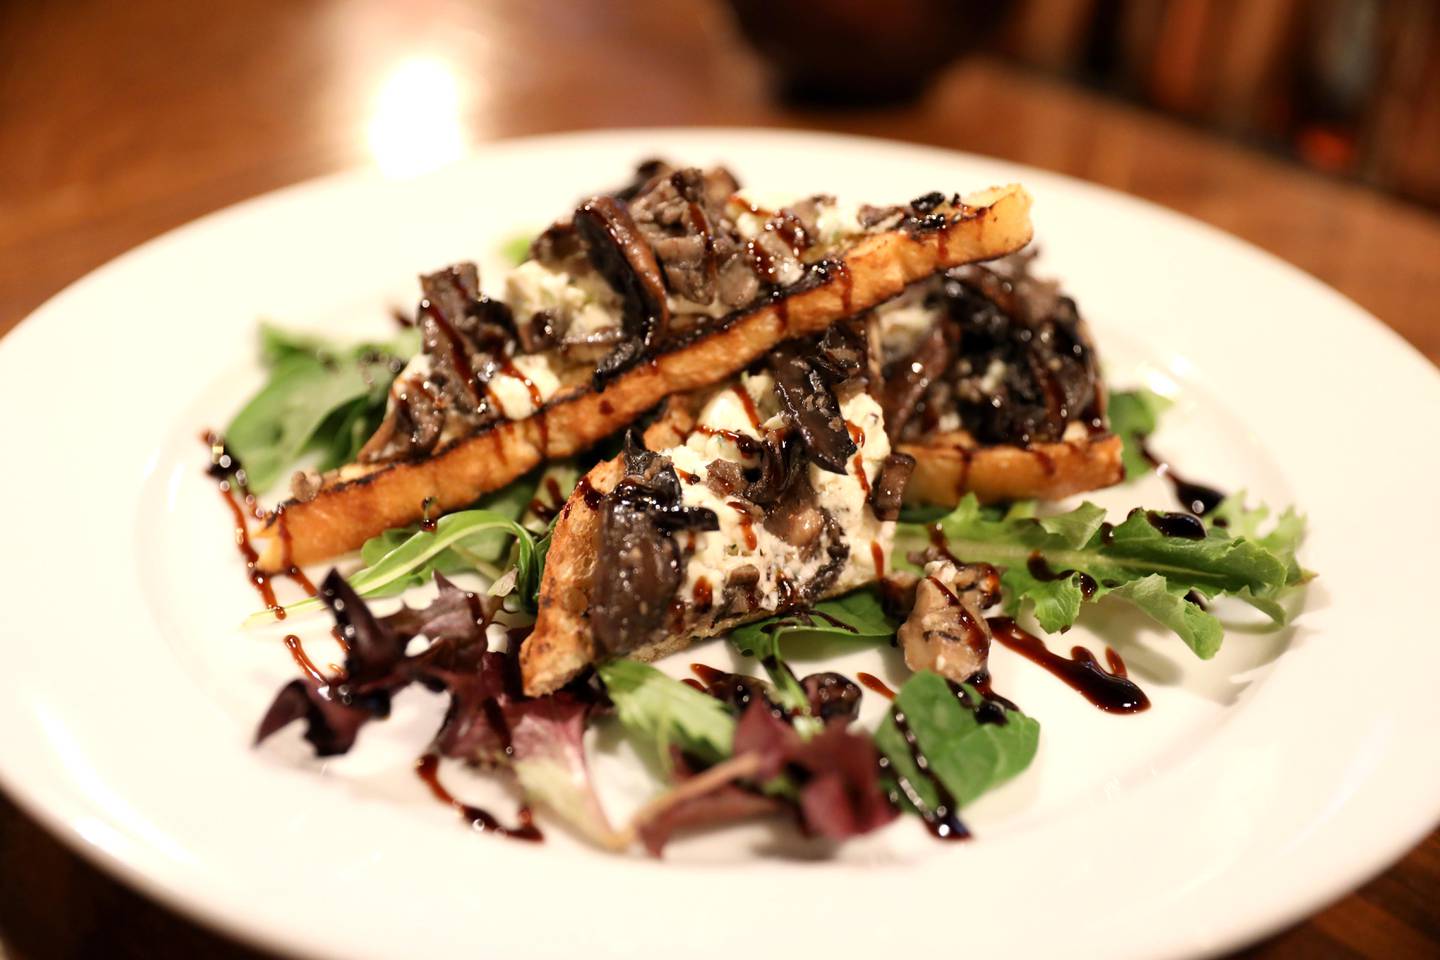 Wild mushroom and Boursin cheese bruscetta on grilled garlic toast at J. Fleming’s Absolutely Delicious restaurant in Westmont. The restaurant will be participating in the Westmont Chamber of Commerce and Tourism Bureau’s Restaurant Week Jan. 19-29, 2023.